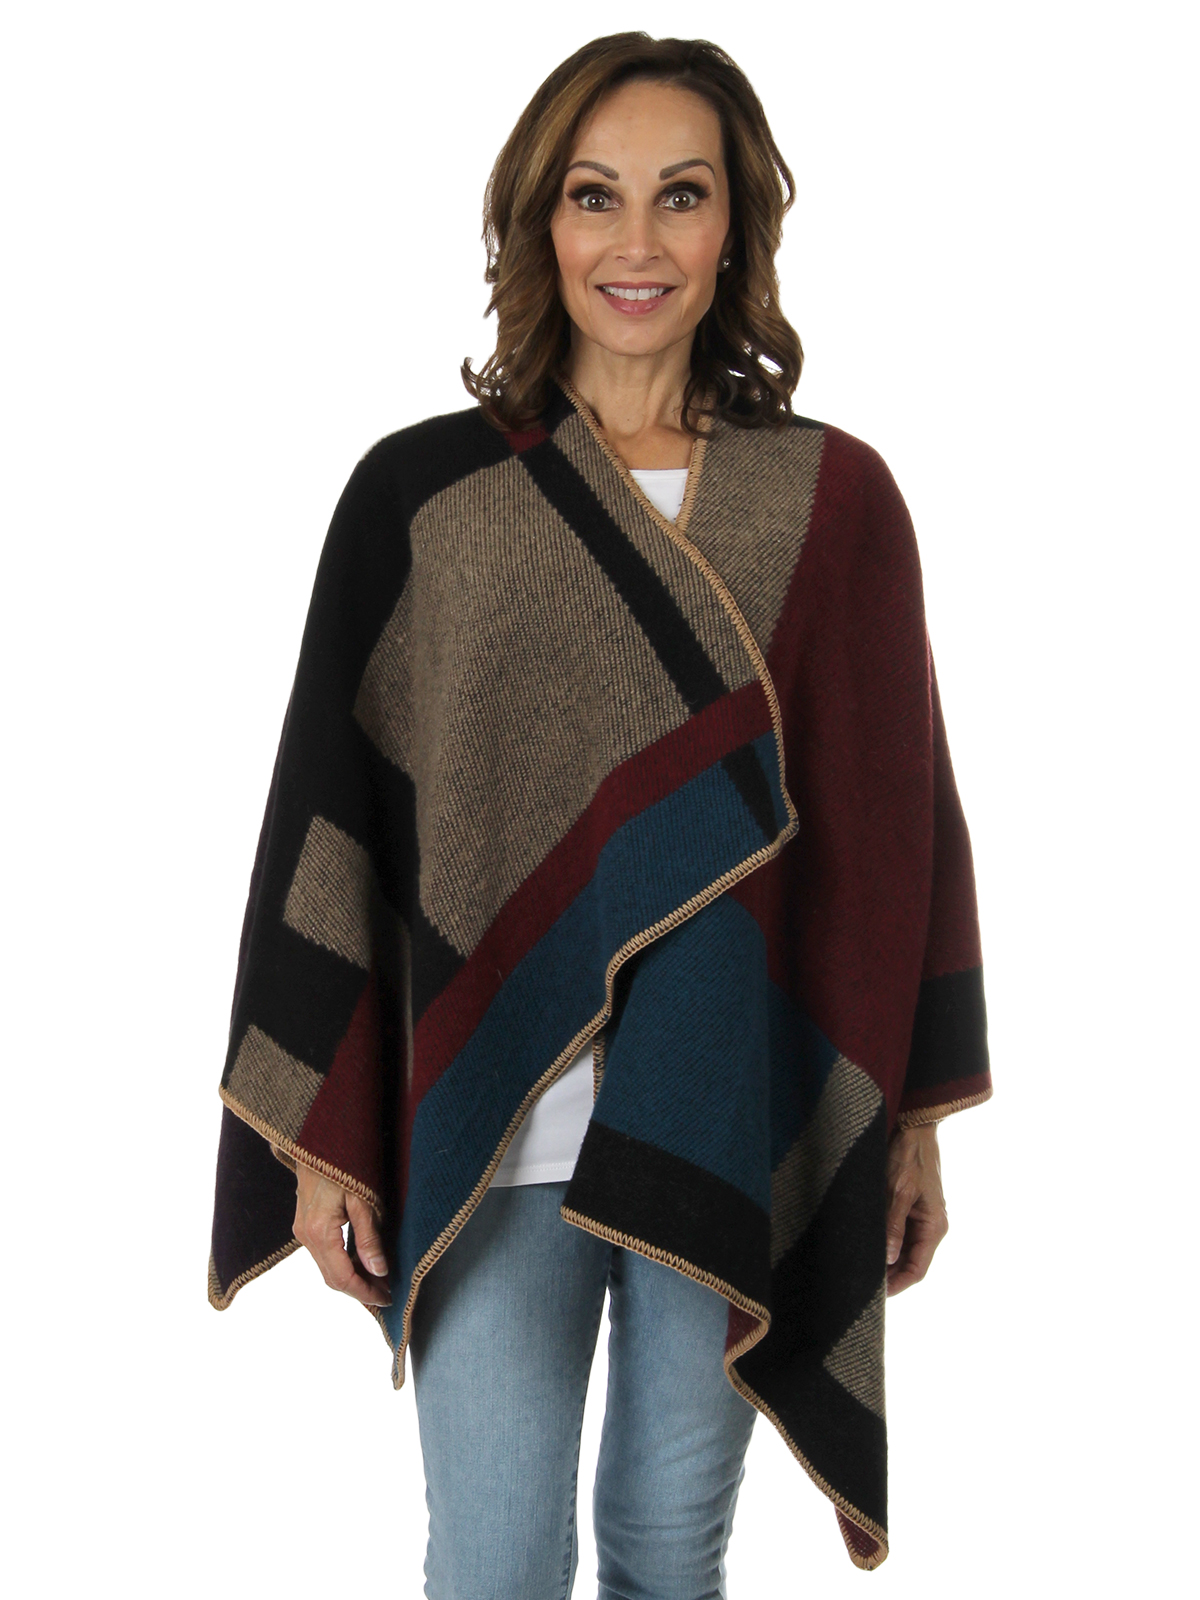 Woman's Multi-Colored Wool Wrap - One Size Fits All | Estate Furs